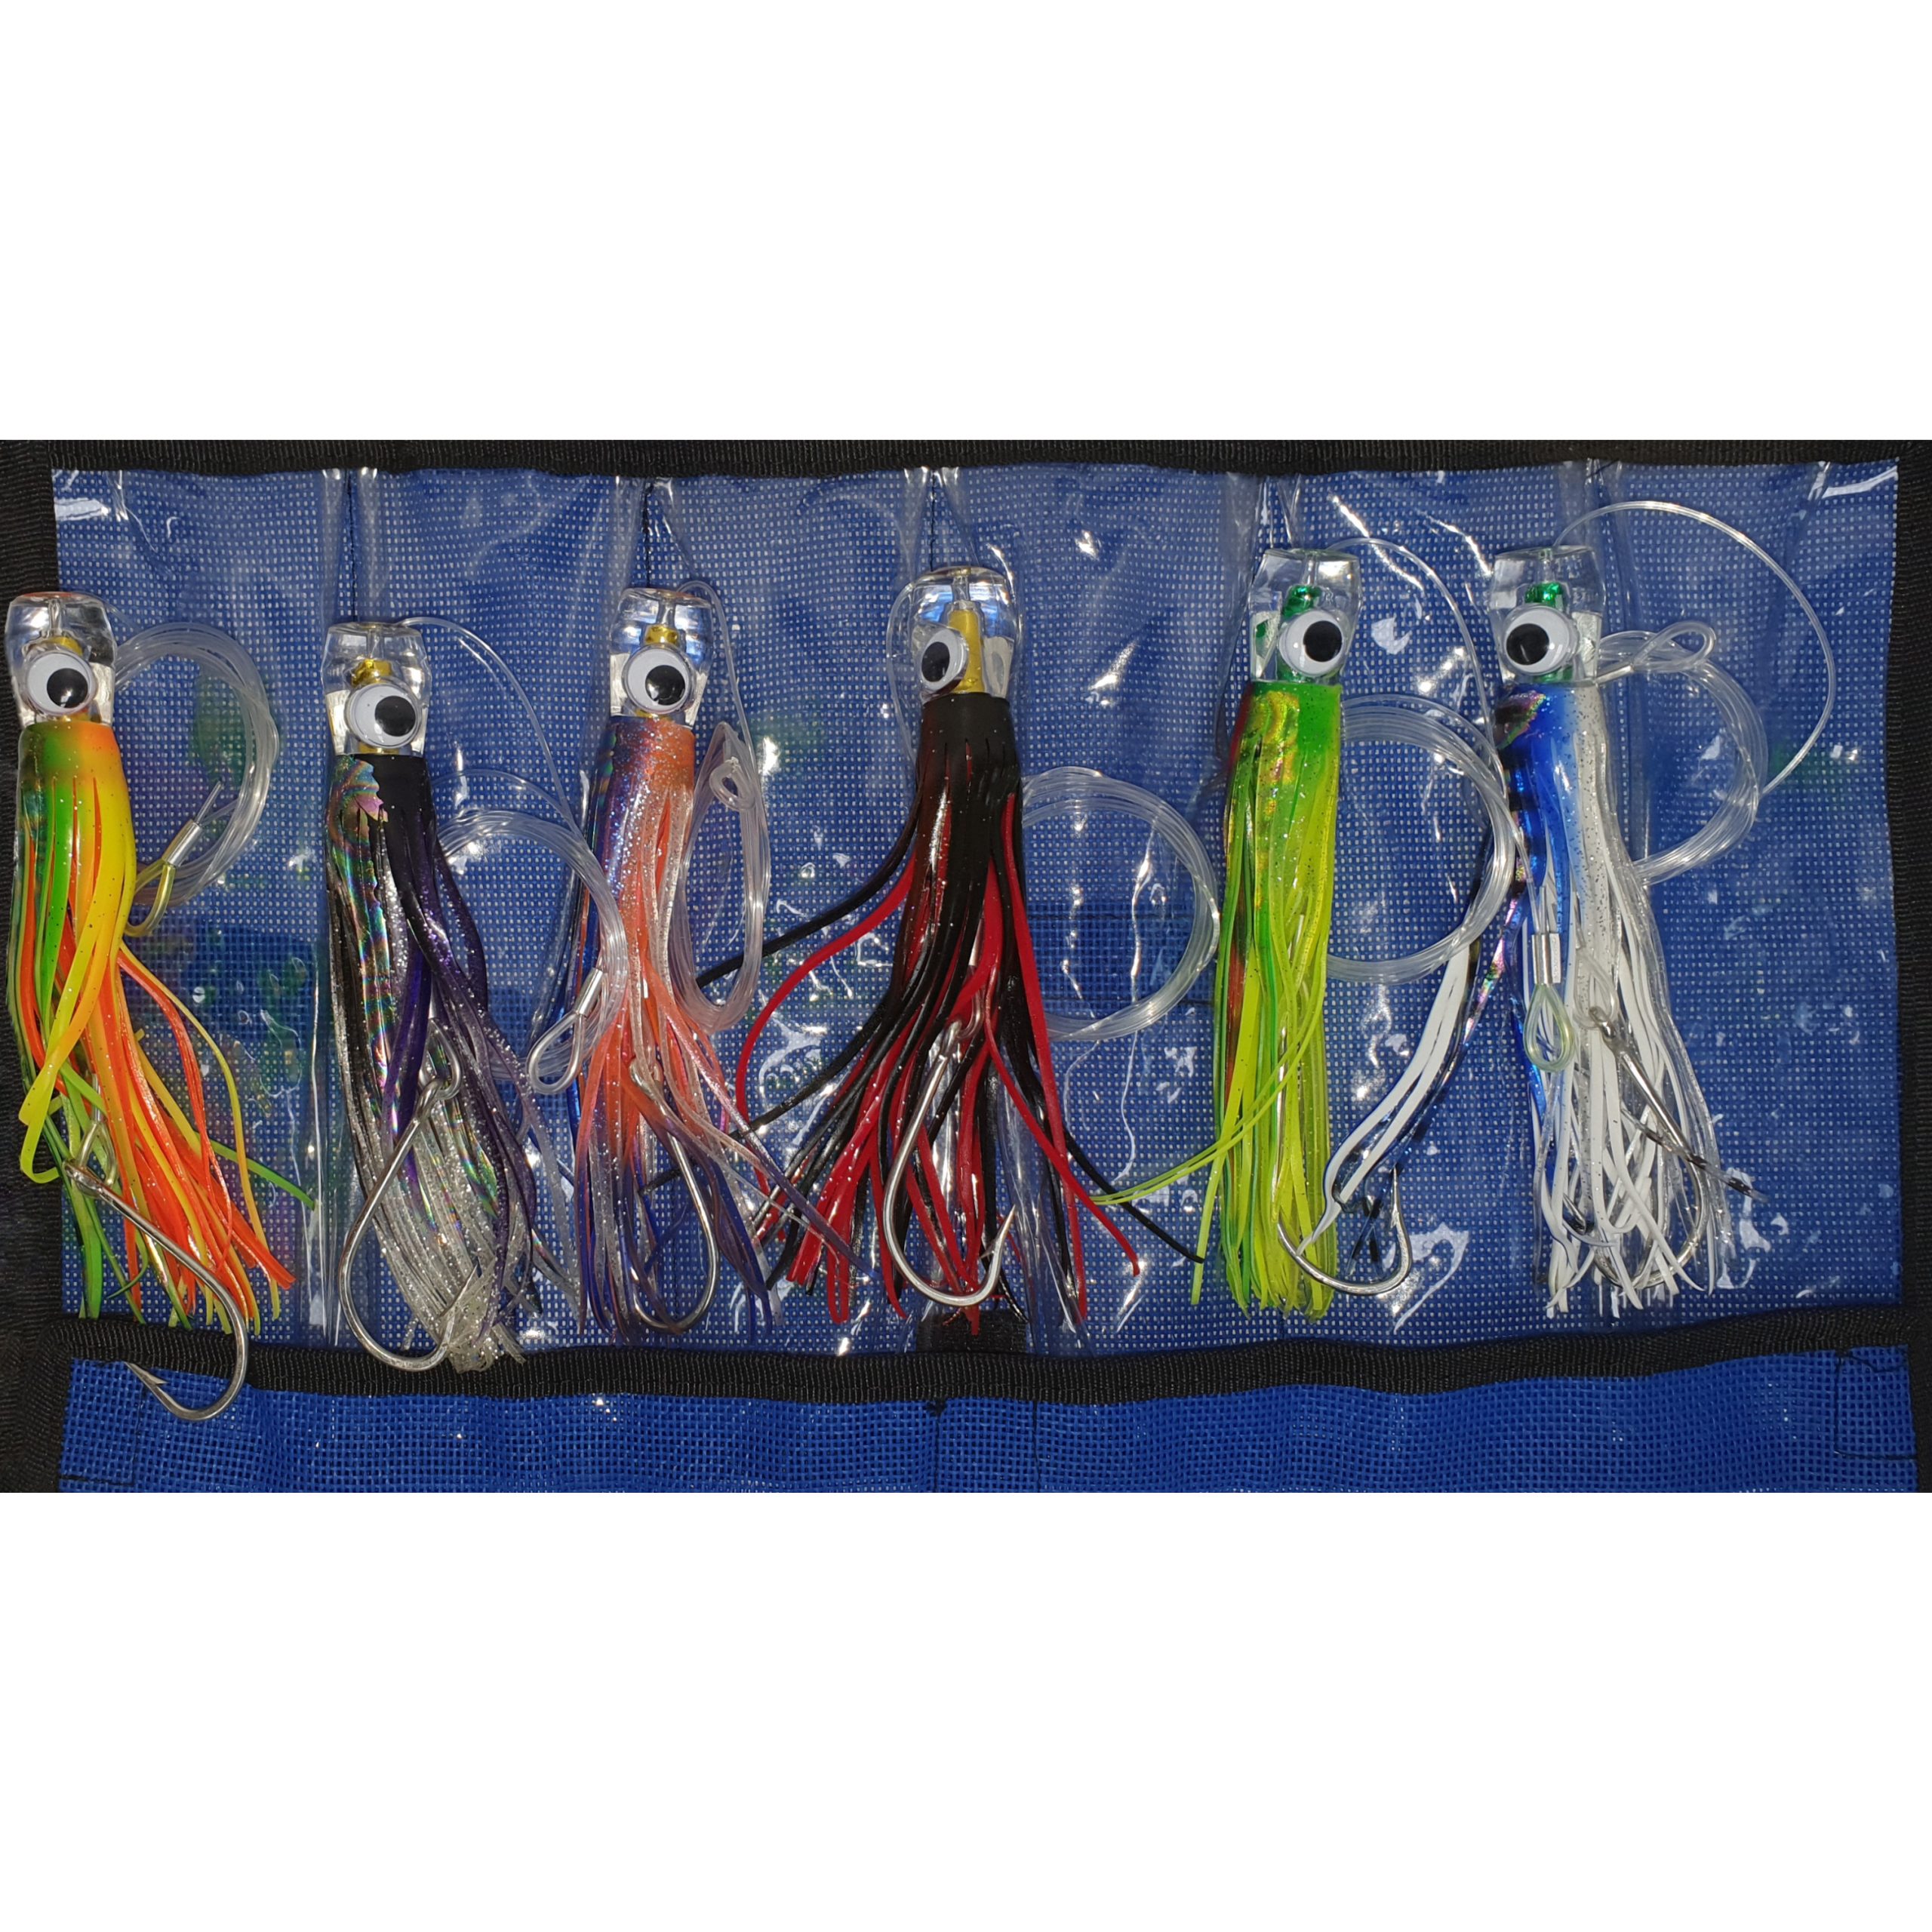 Skirted Trolling Lures Bag – X6 Pcs. With Rigged Line & Hook • Vtackle